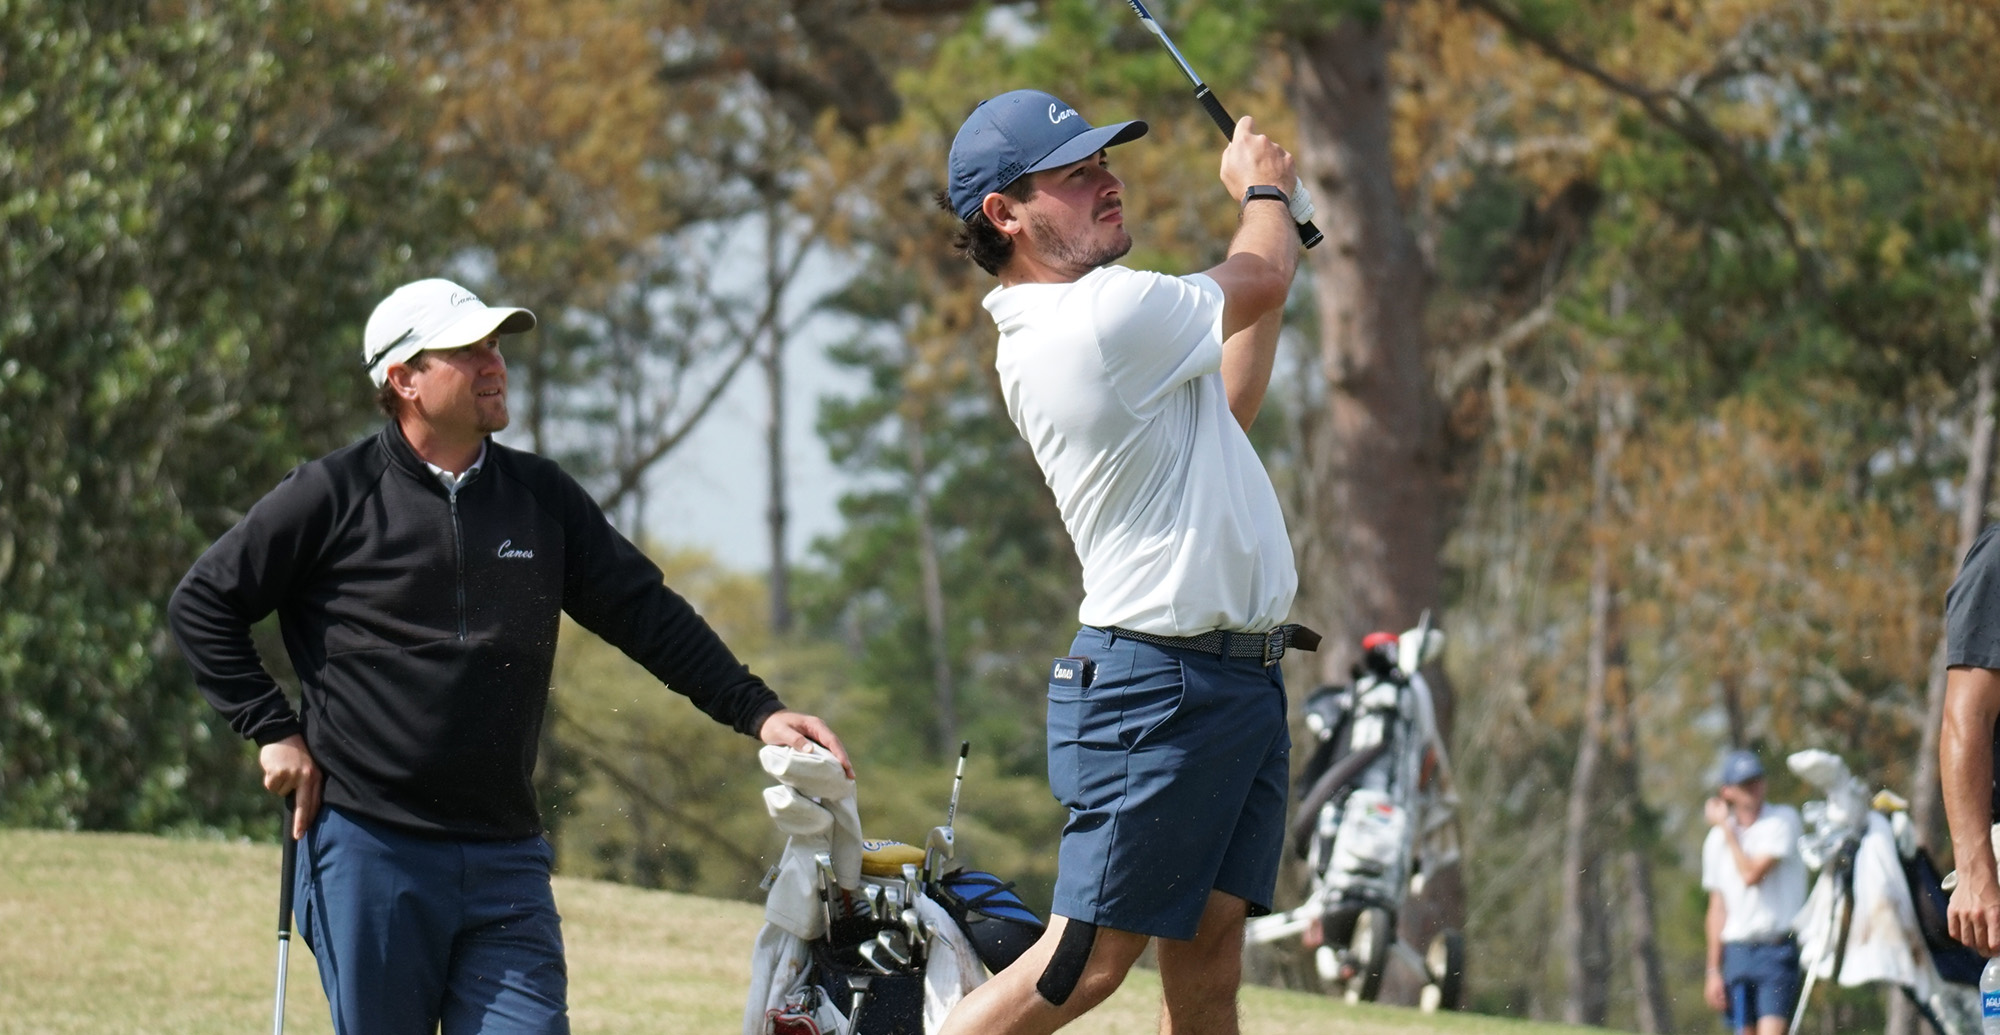 GSW Golf Ranked Seventh in Latest Poll